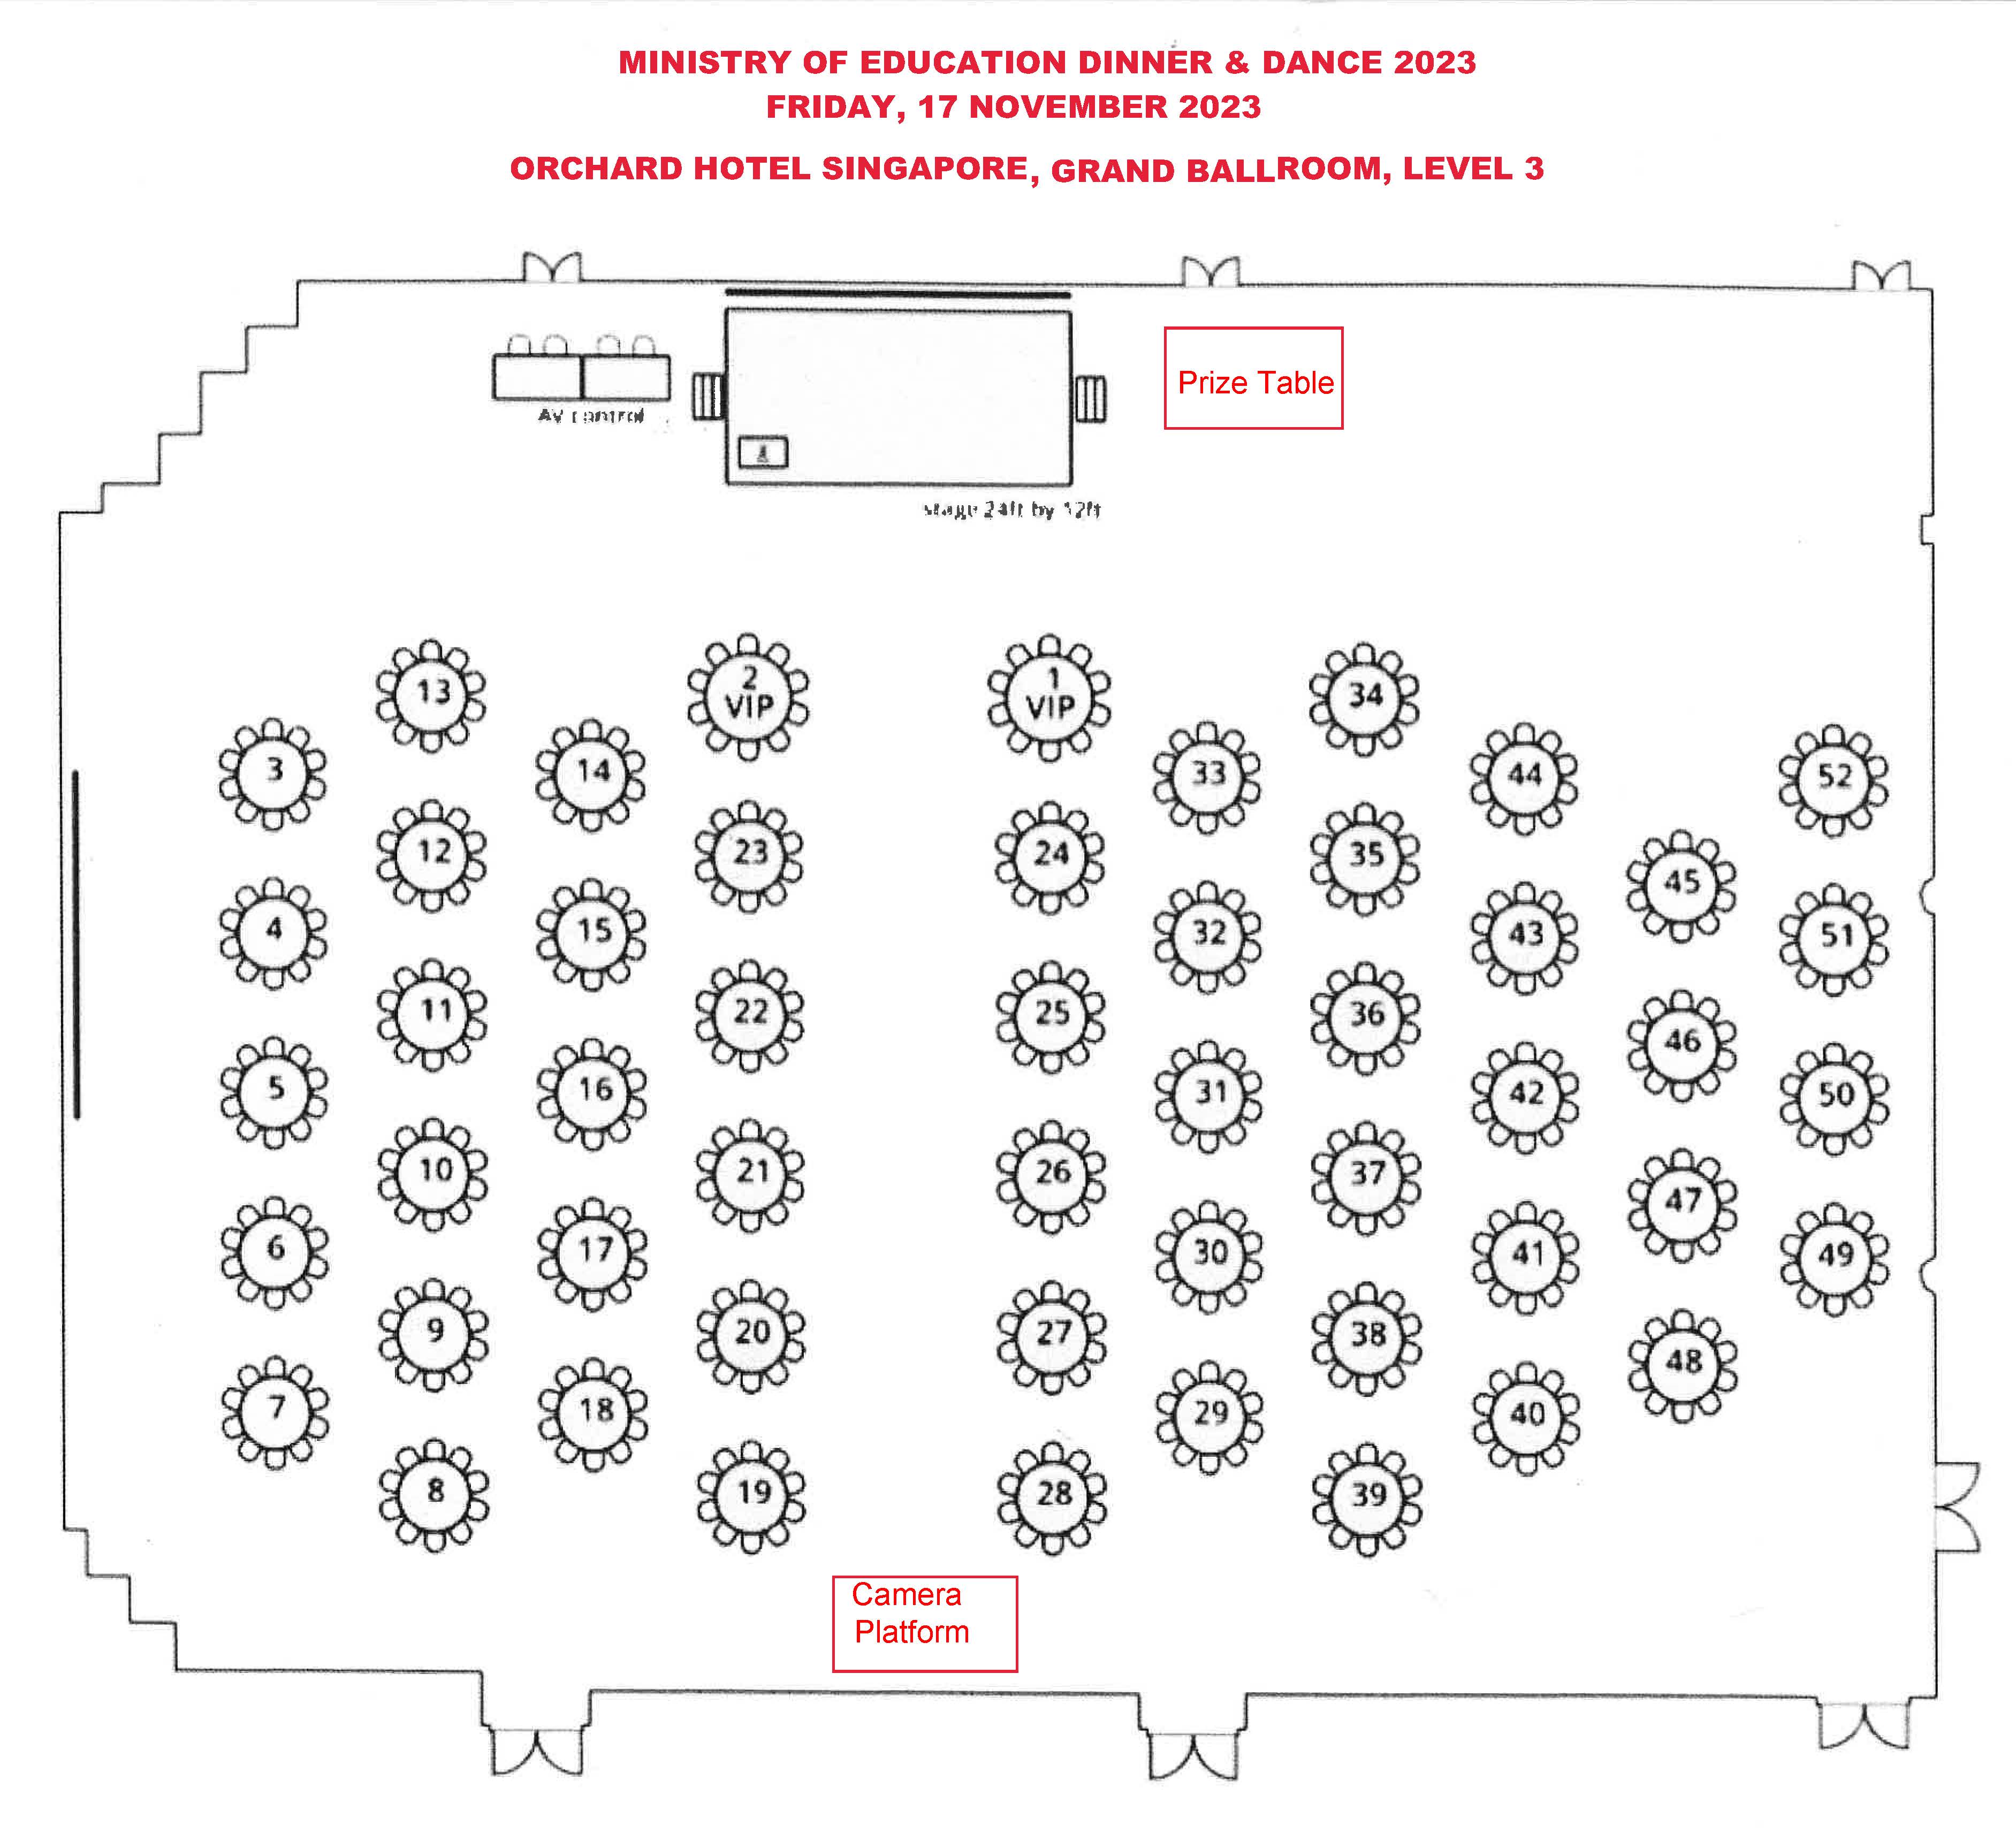 Orchard Hotel Grand Ballroom Layout - 52 tables